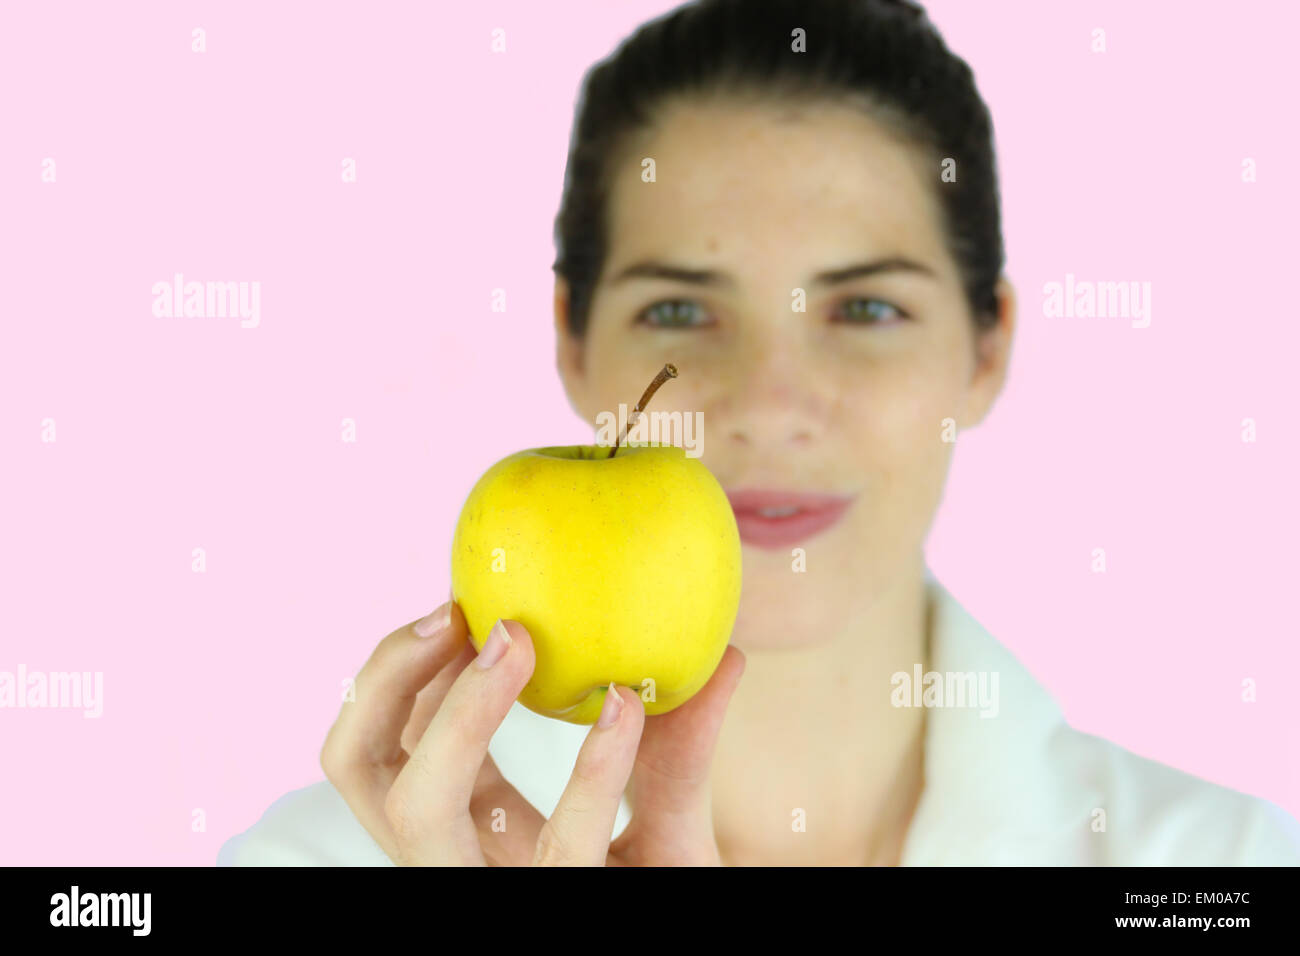 Girl holding a yellow apple Stock Photo